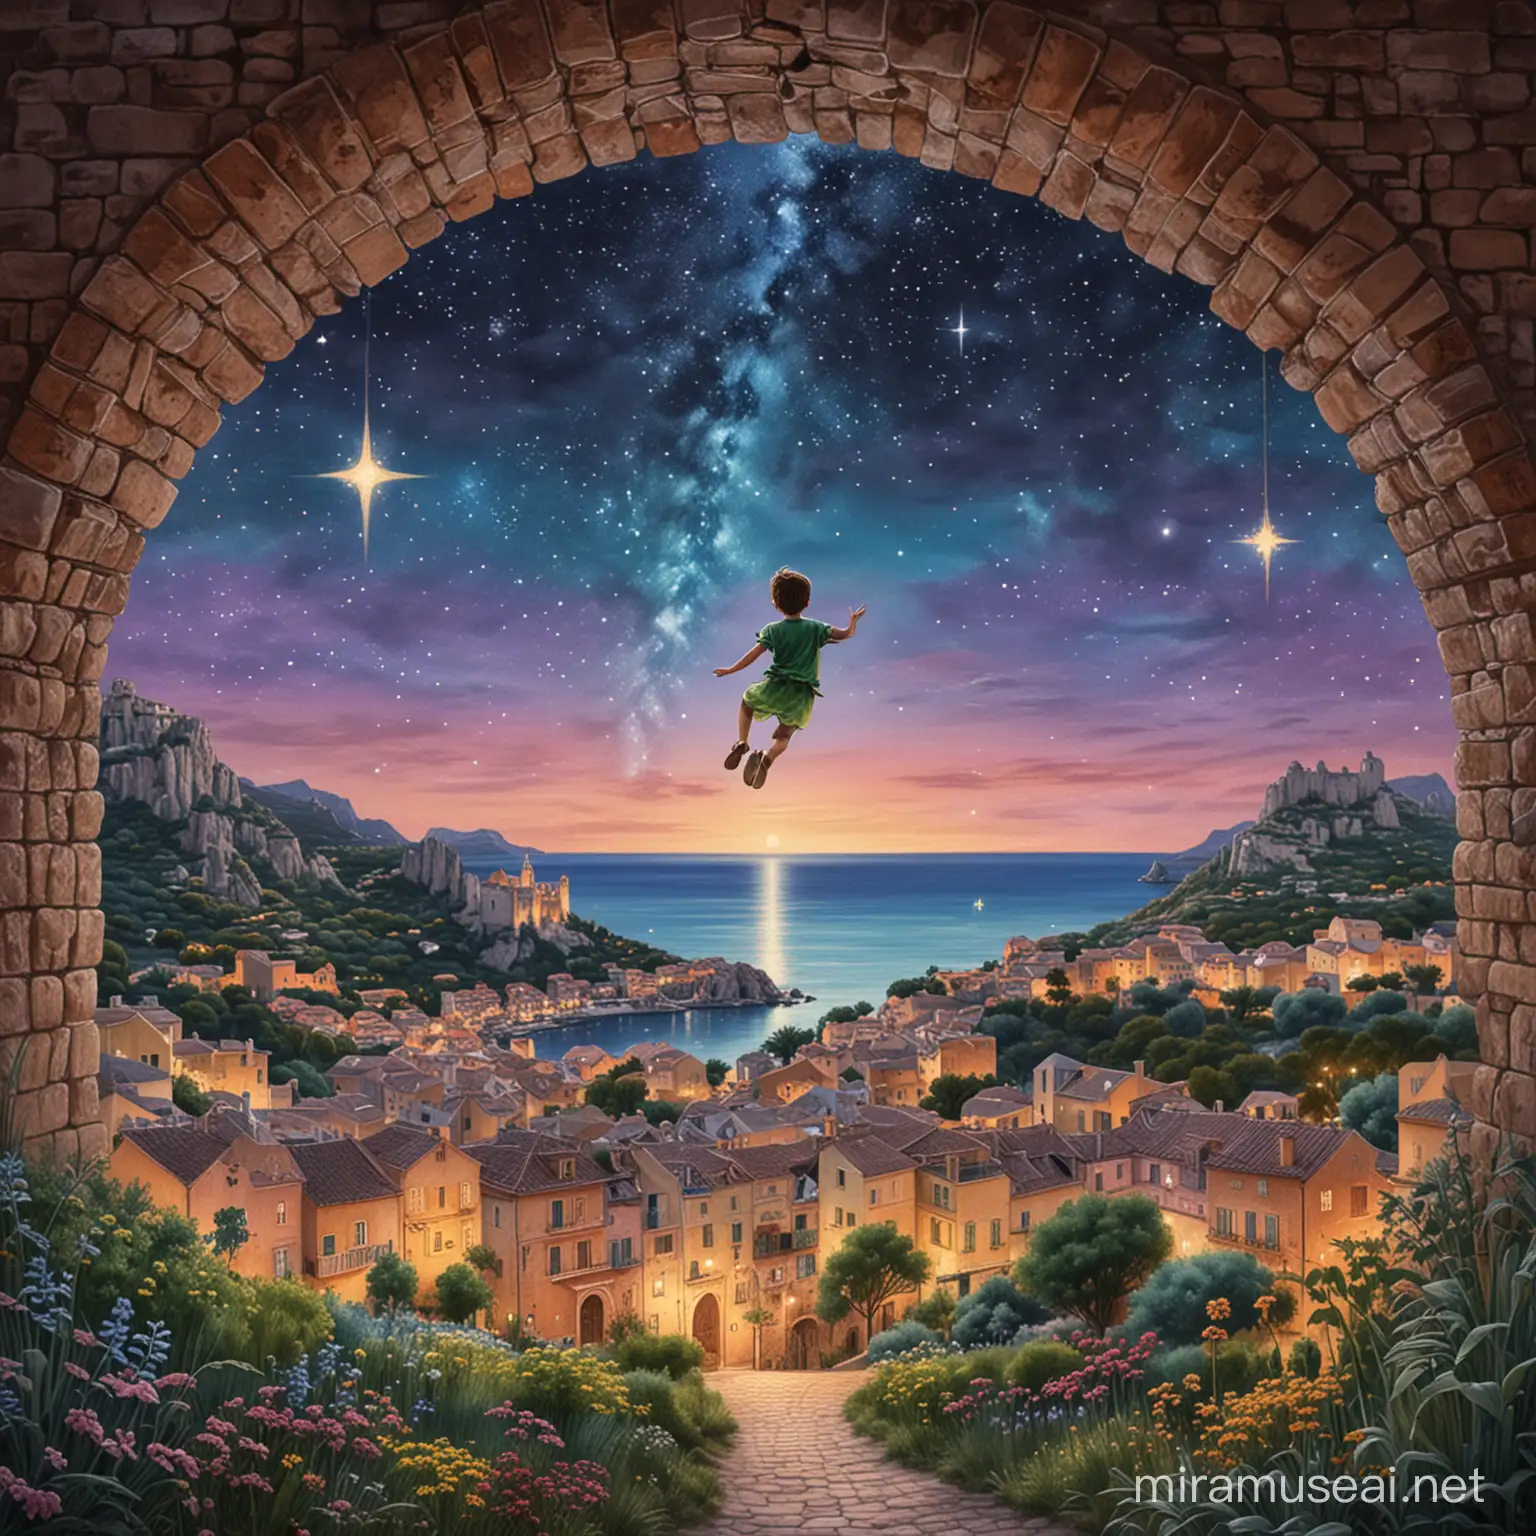 image tons pastels décors divinatory art multiple island full of vegetation peter pan child flying sparkly night sky include Building of bierkönig mallorca